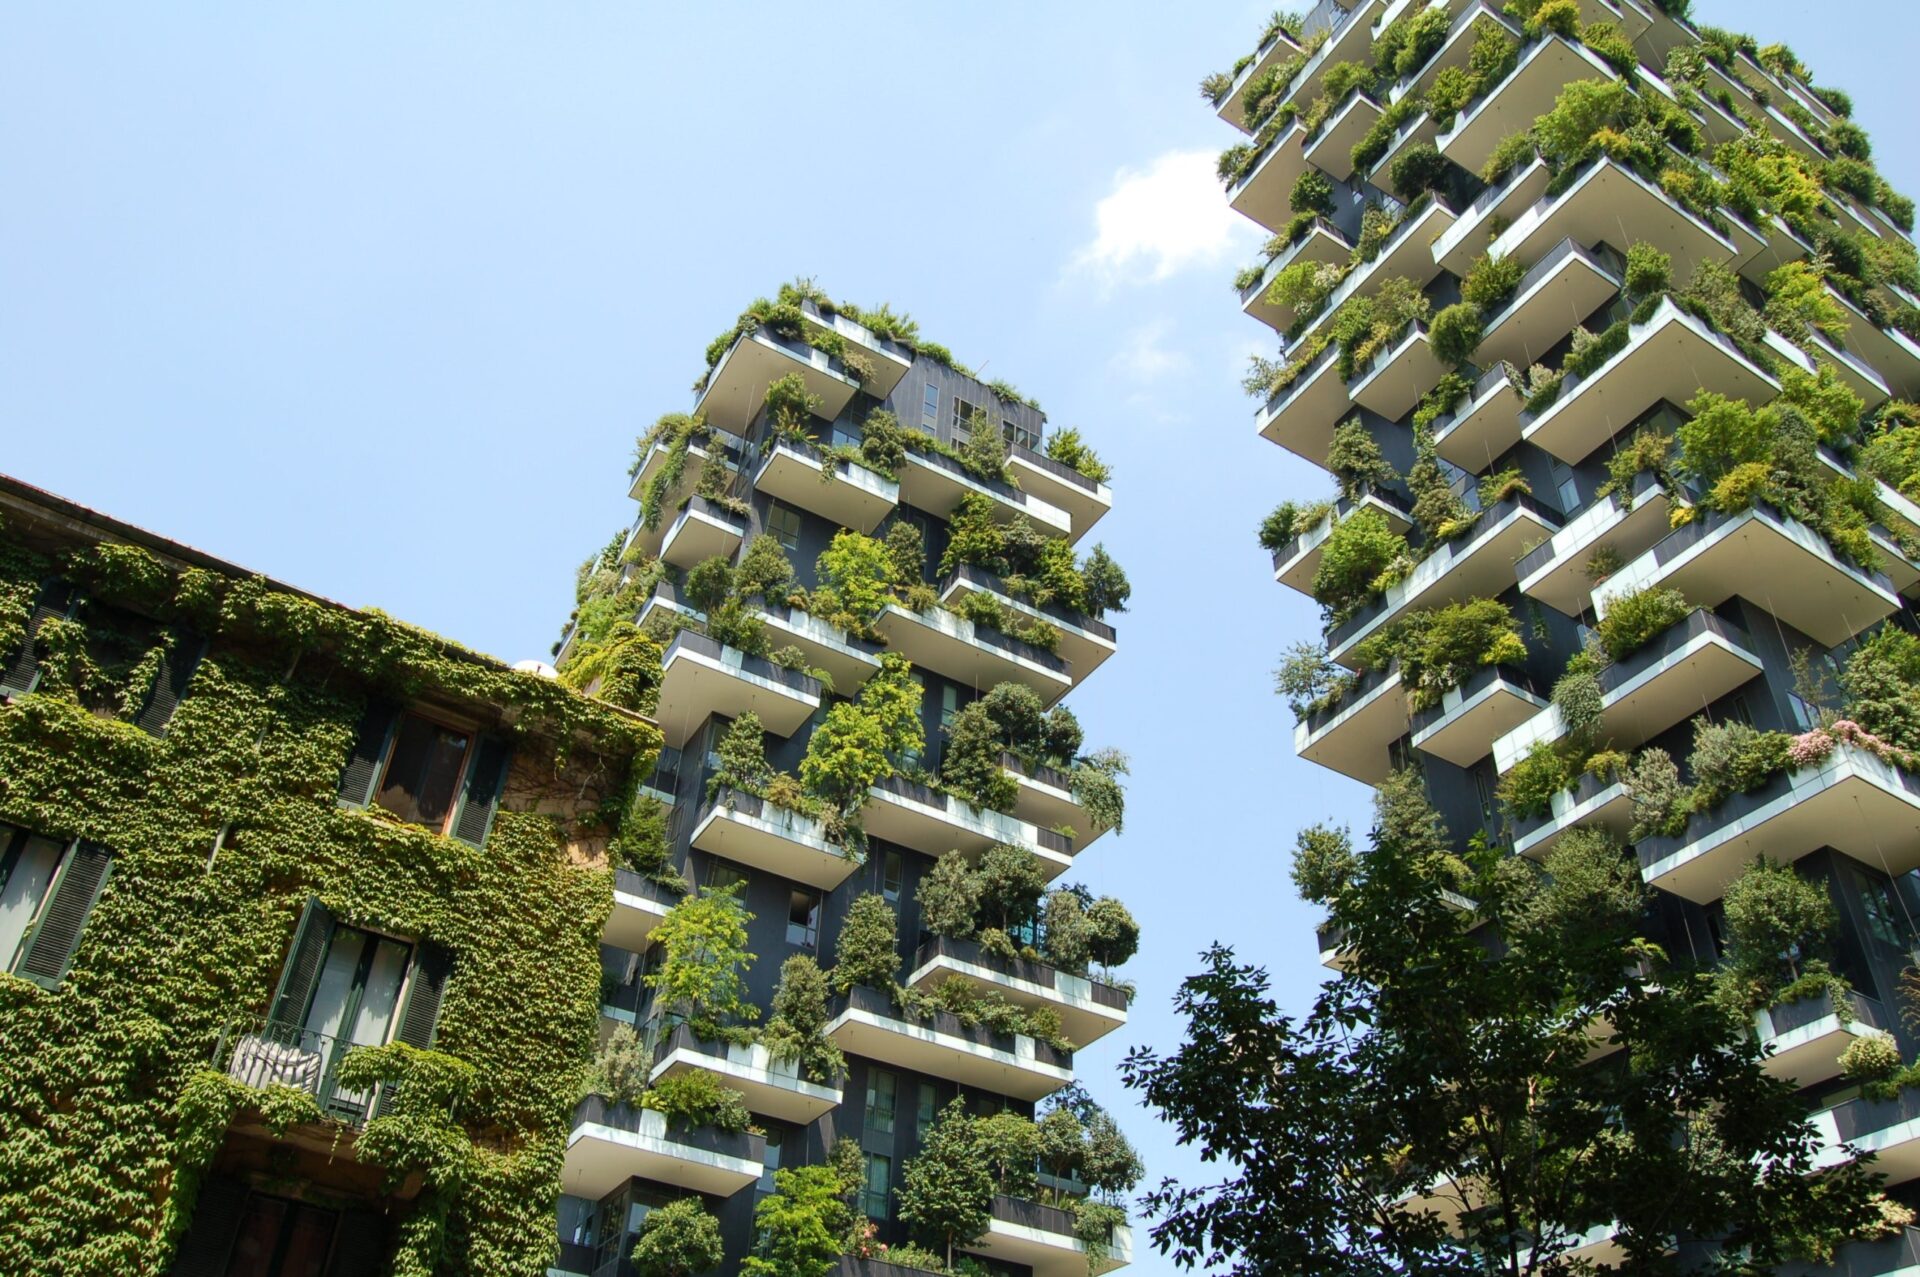 Canada leads by example in sustainability: Green Buildings and their importance on meeting SDG’s